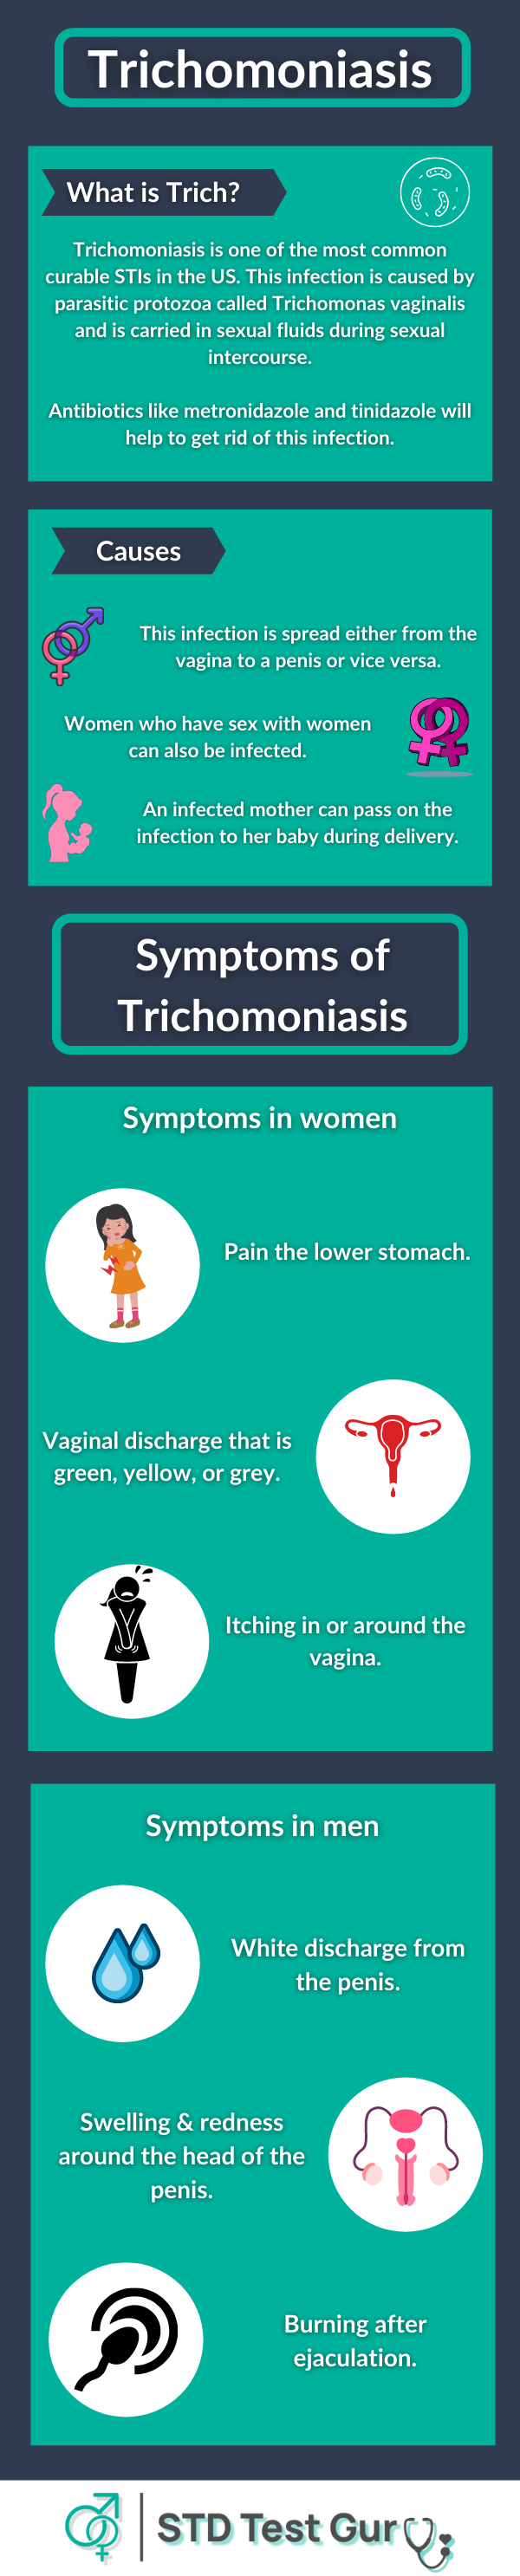 Trichomoniasis: Causes and Symptoms in men and women